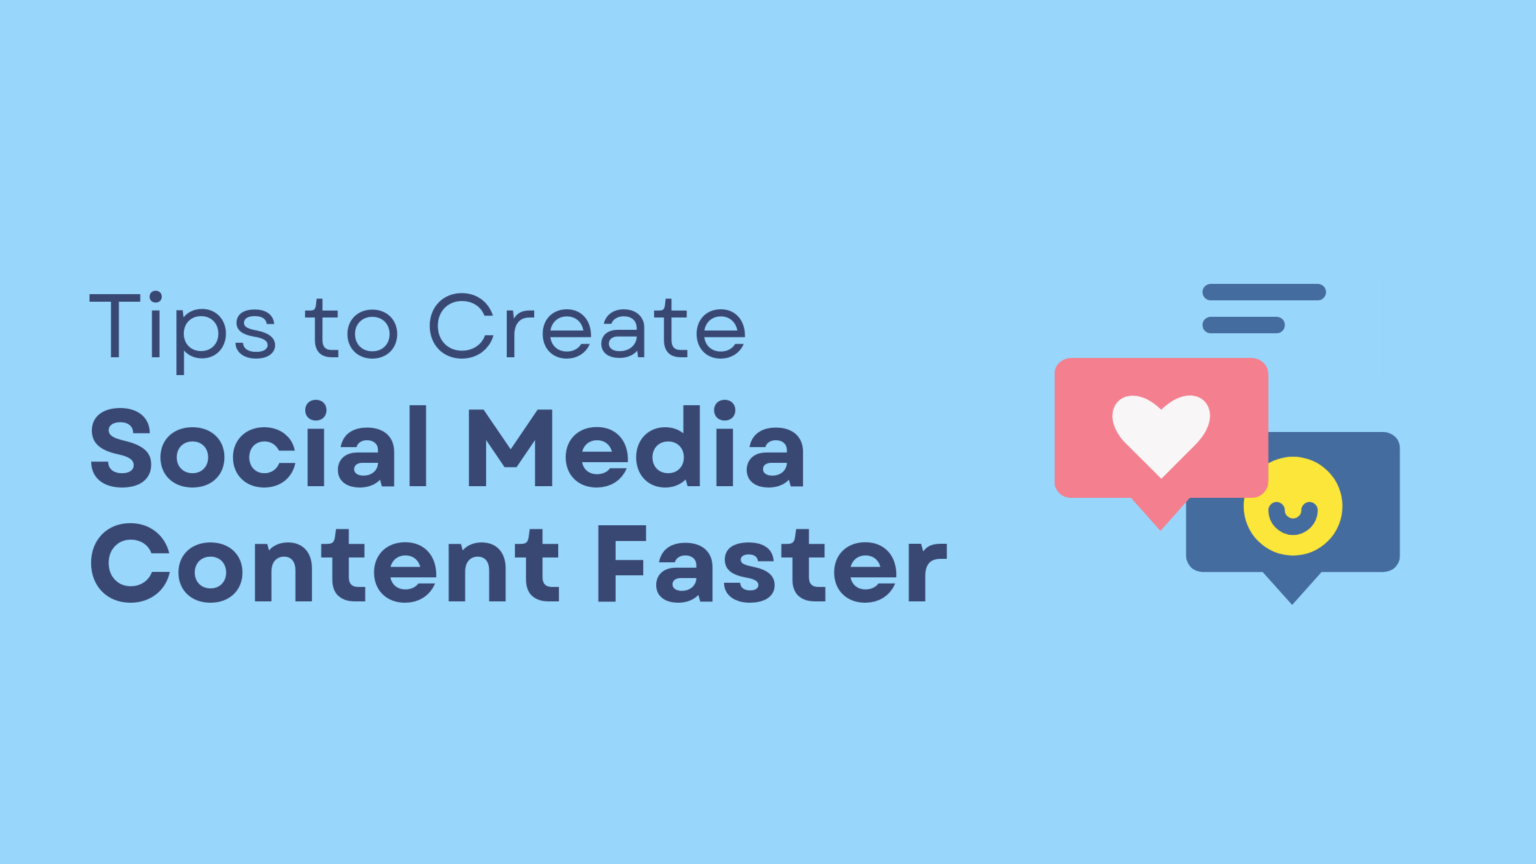 Tips to Create Social Media Content Faster